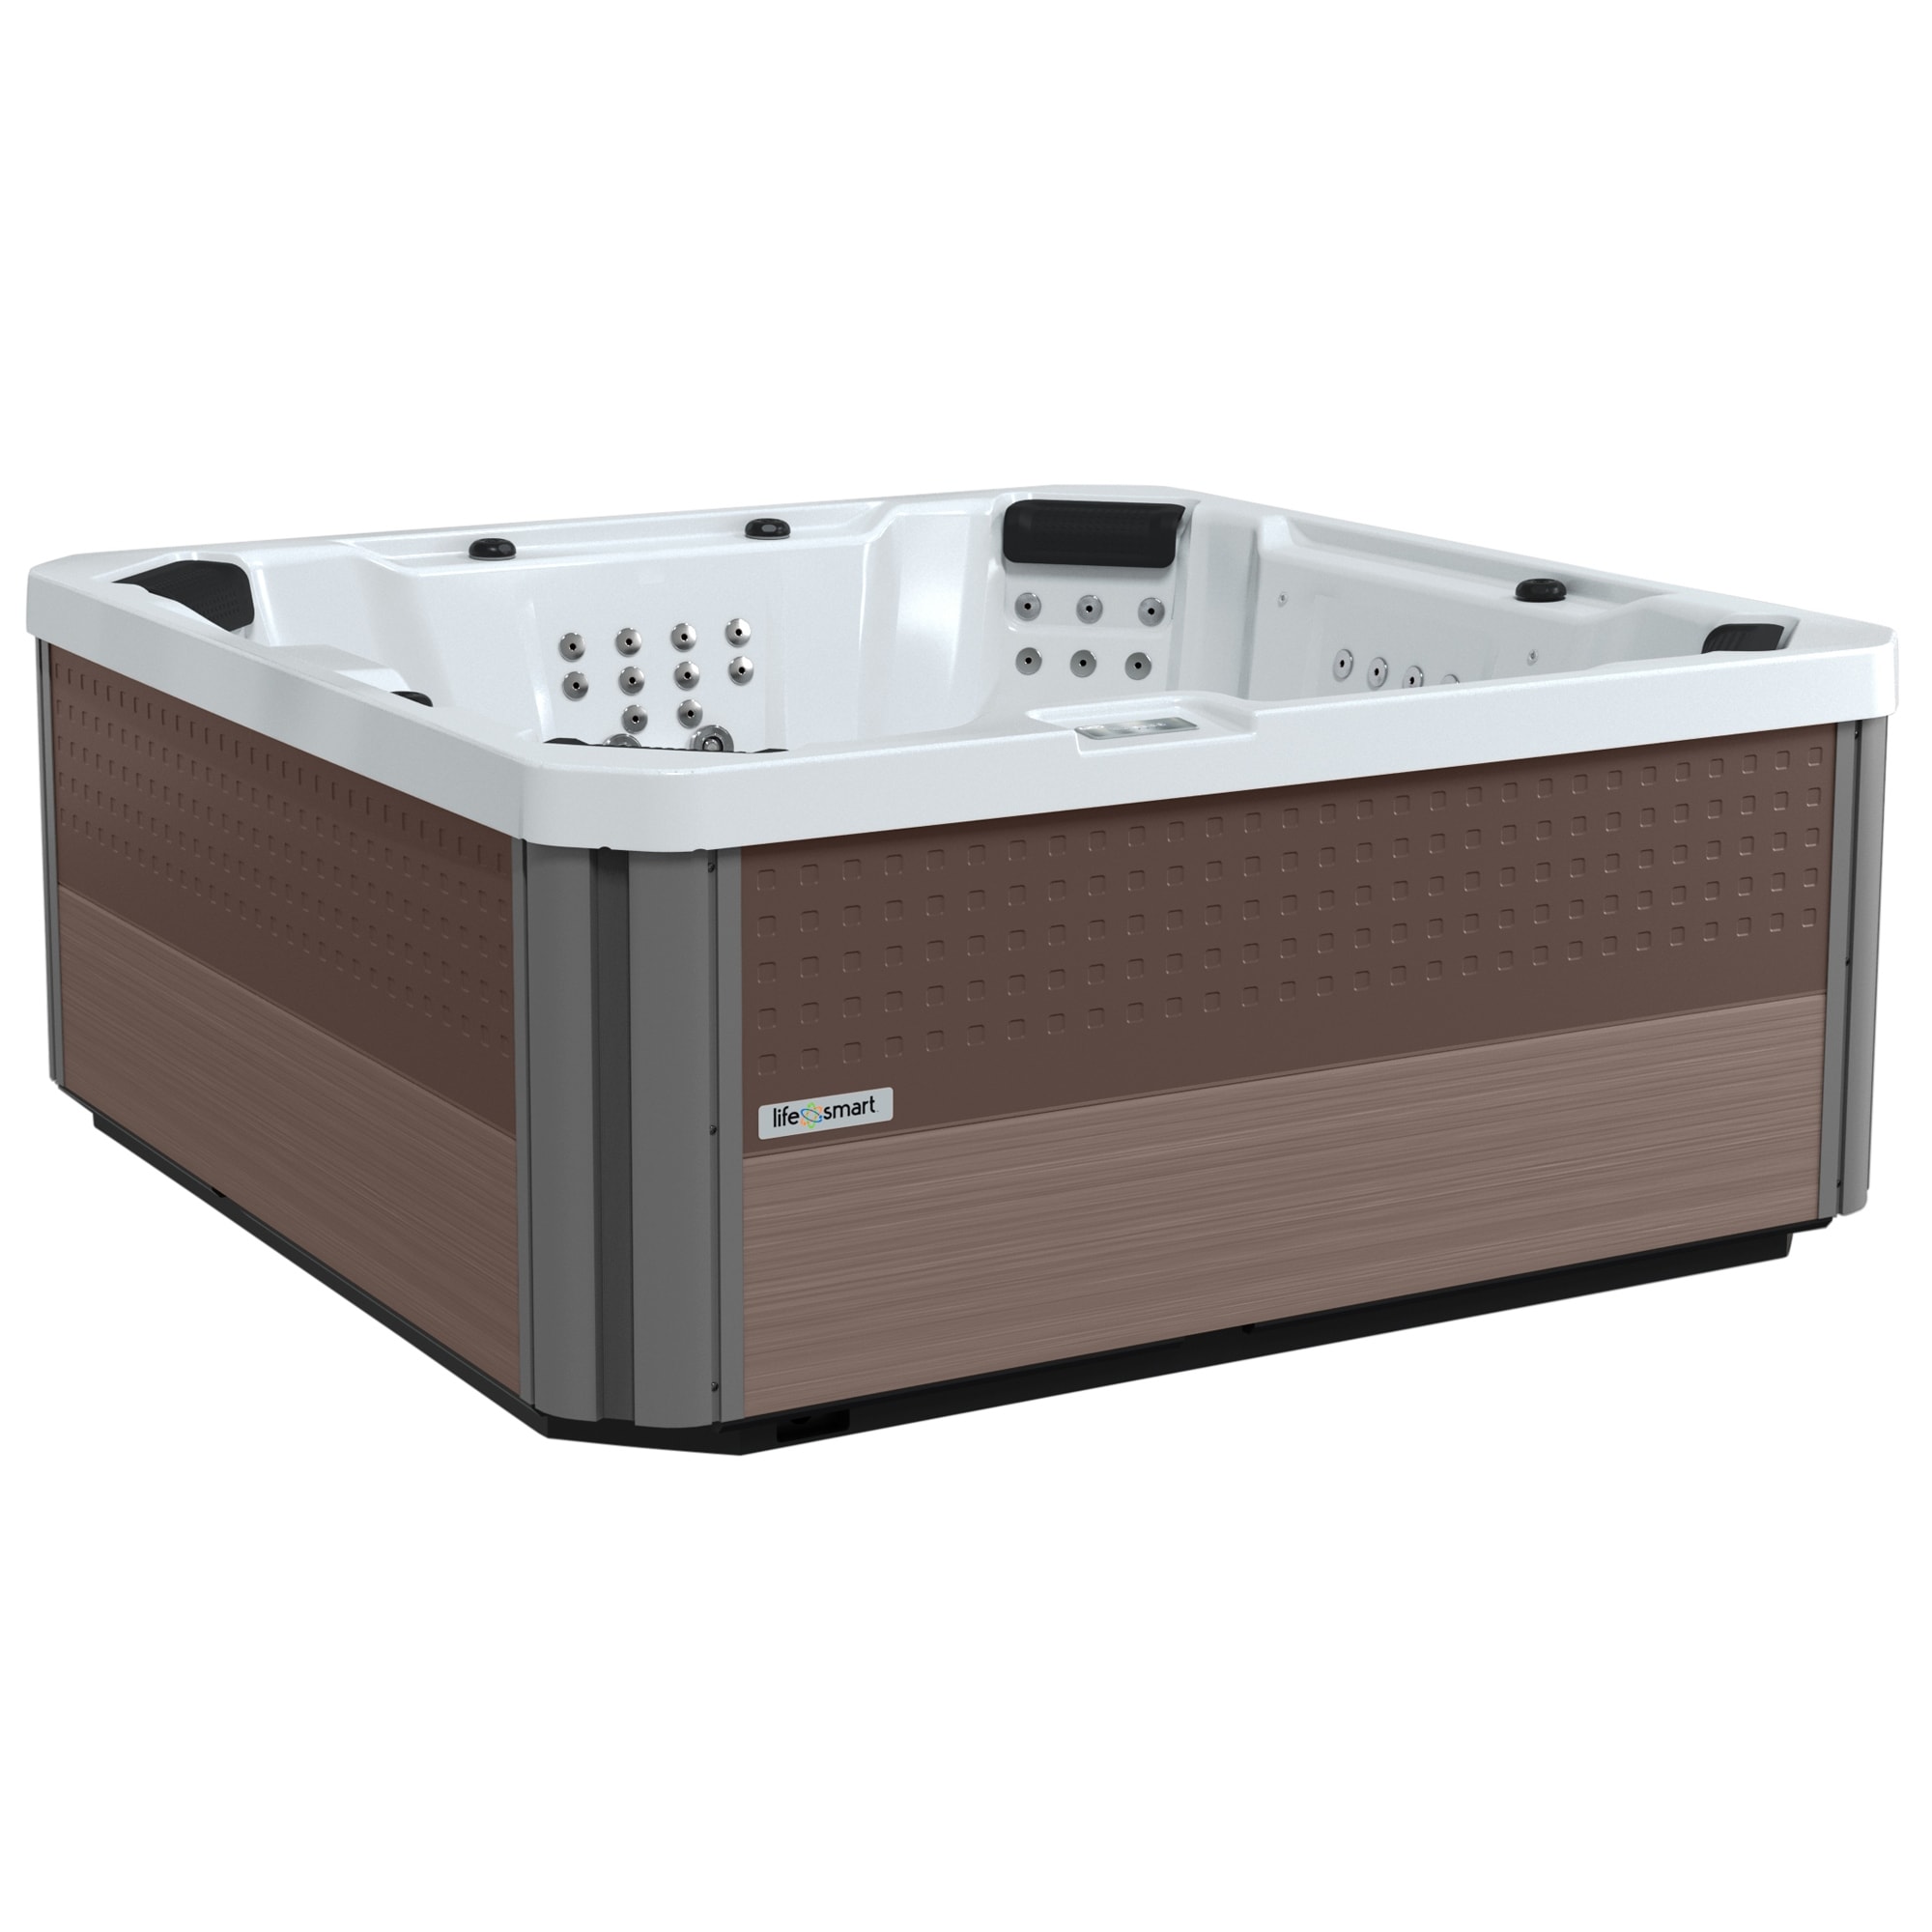 Lifesmart Palmetto 7-Person 72-Jet 230V Acrylic Spa with Open Seating